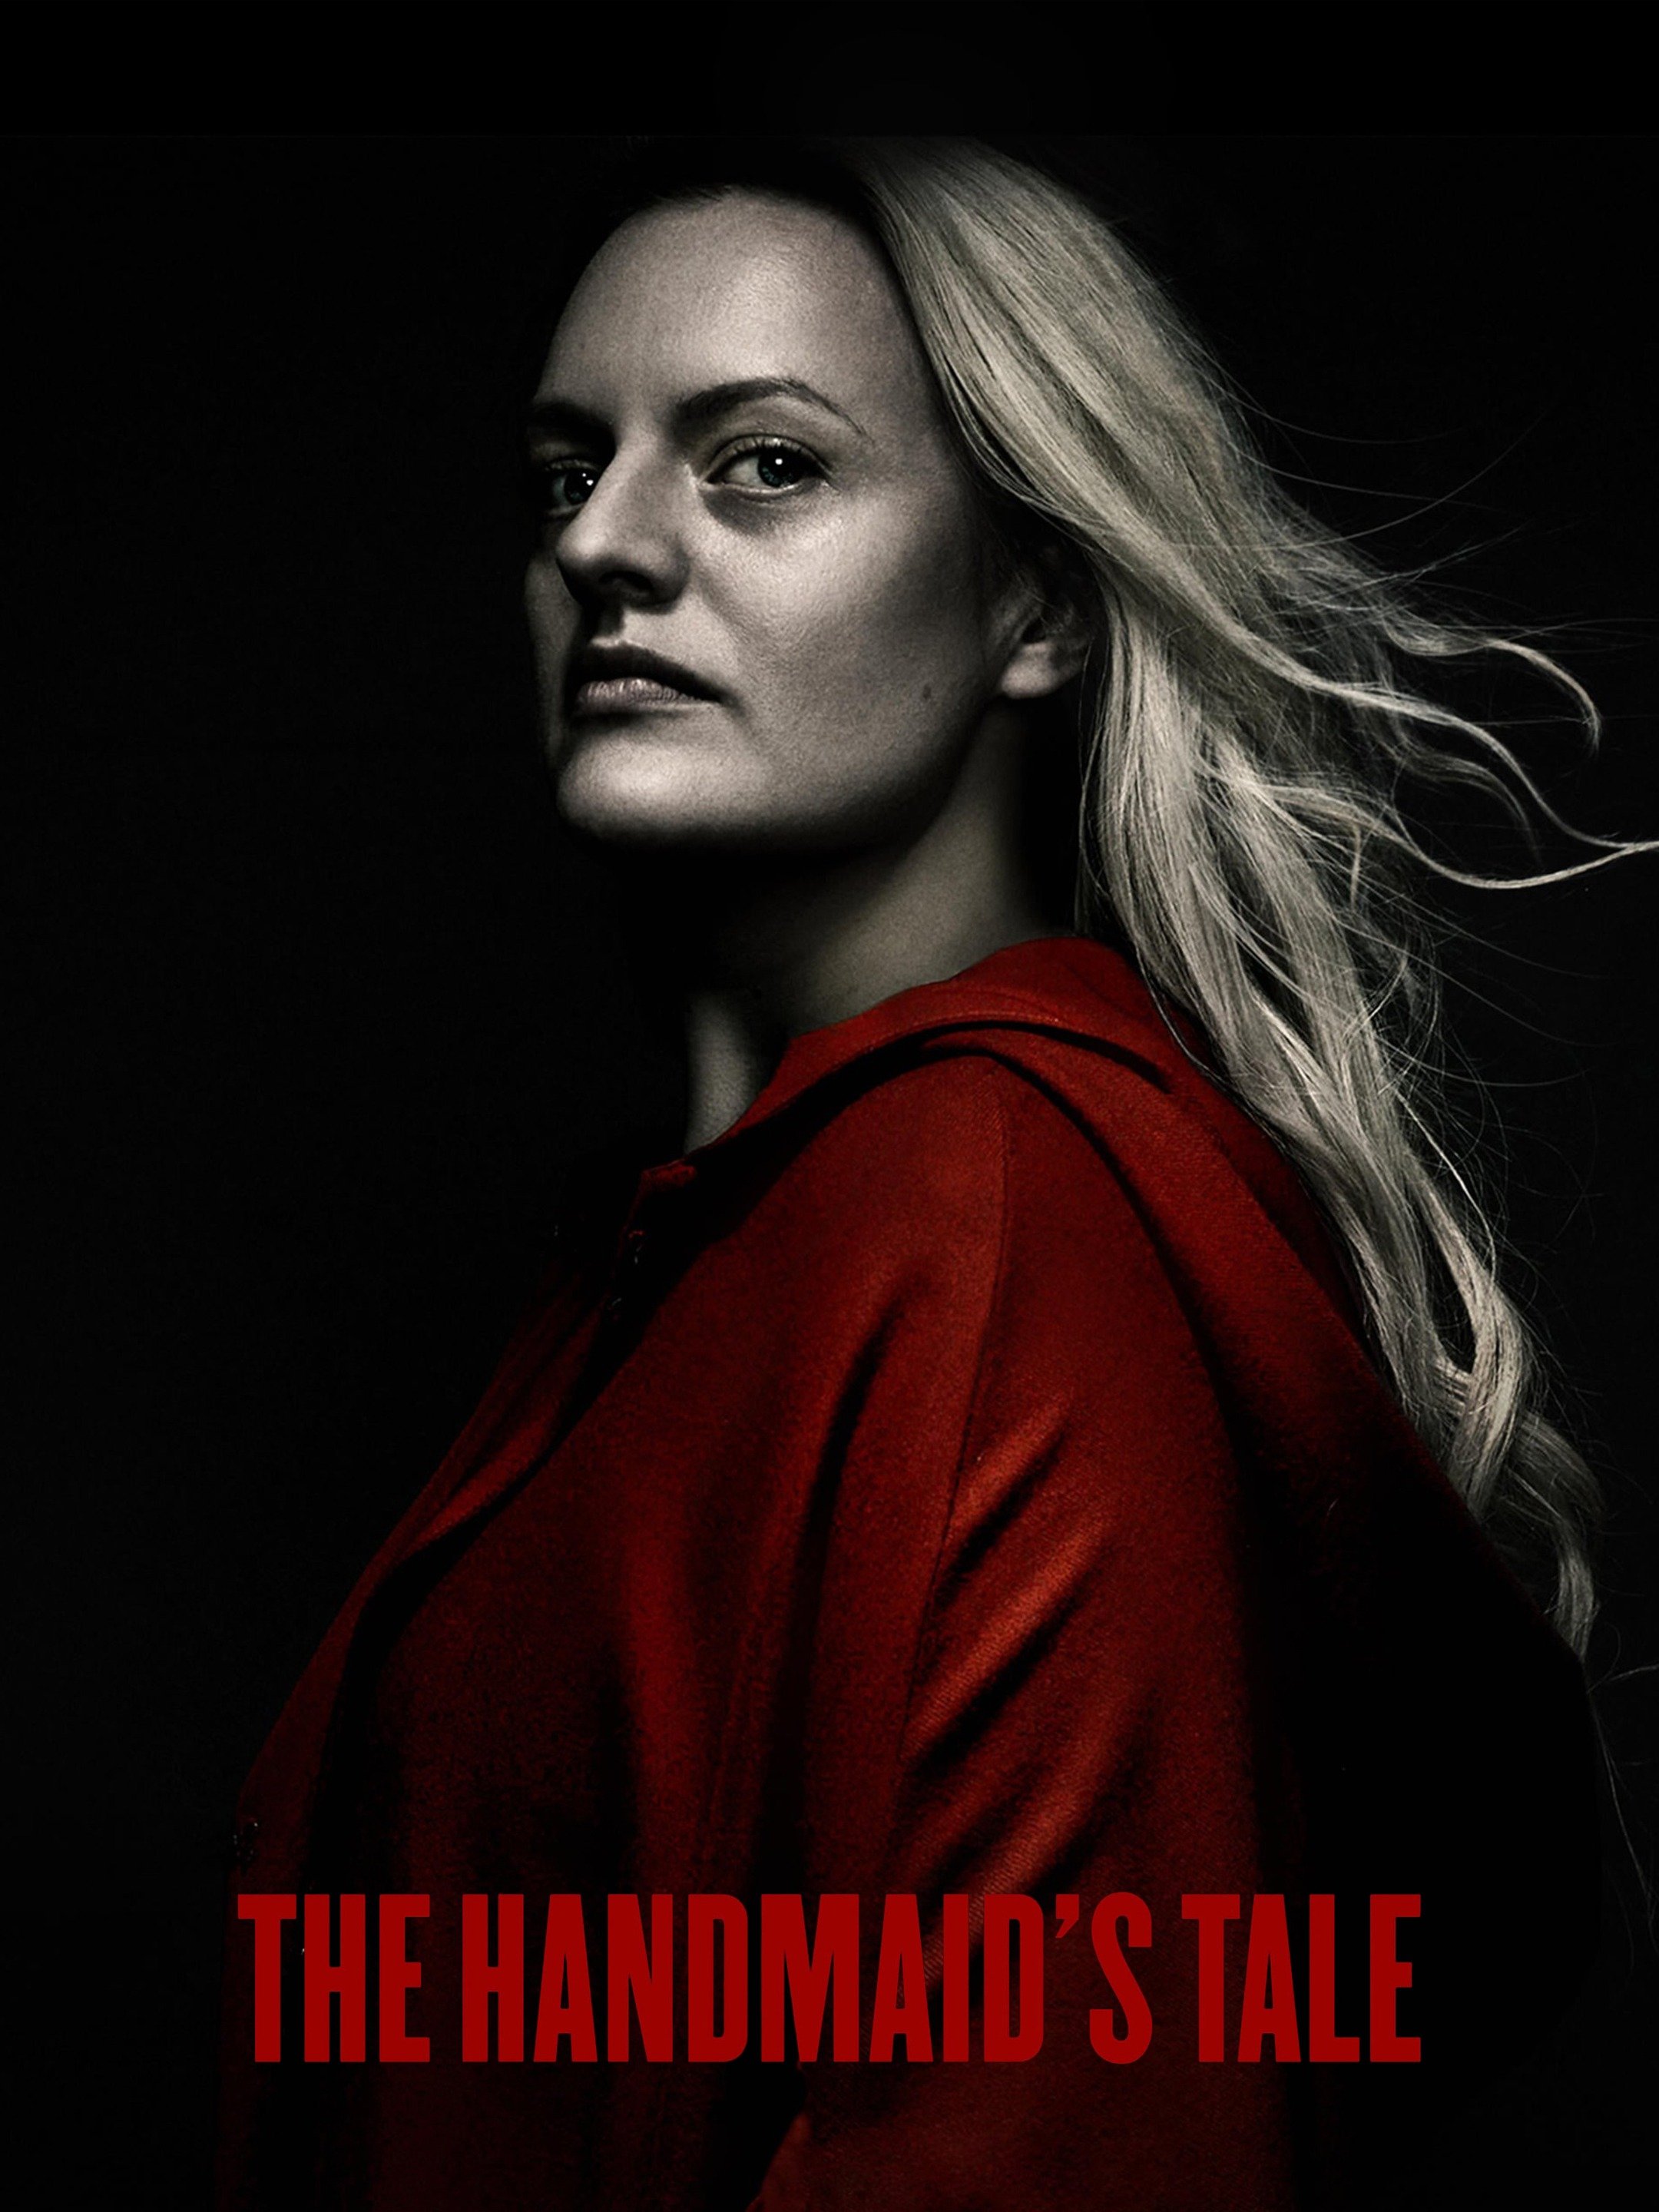 The Handmaids Tale 2019 Wallpapers